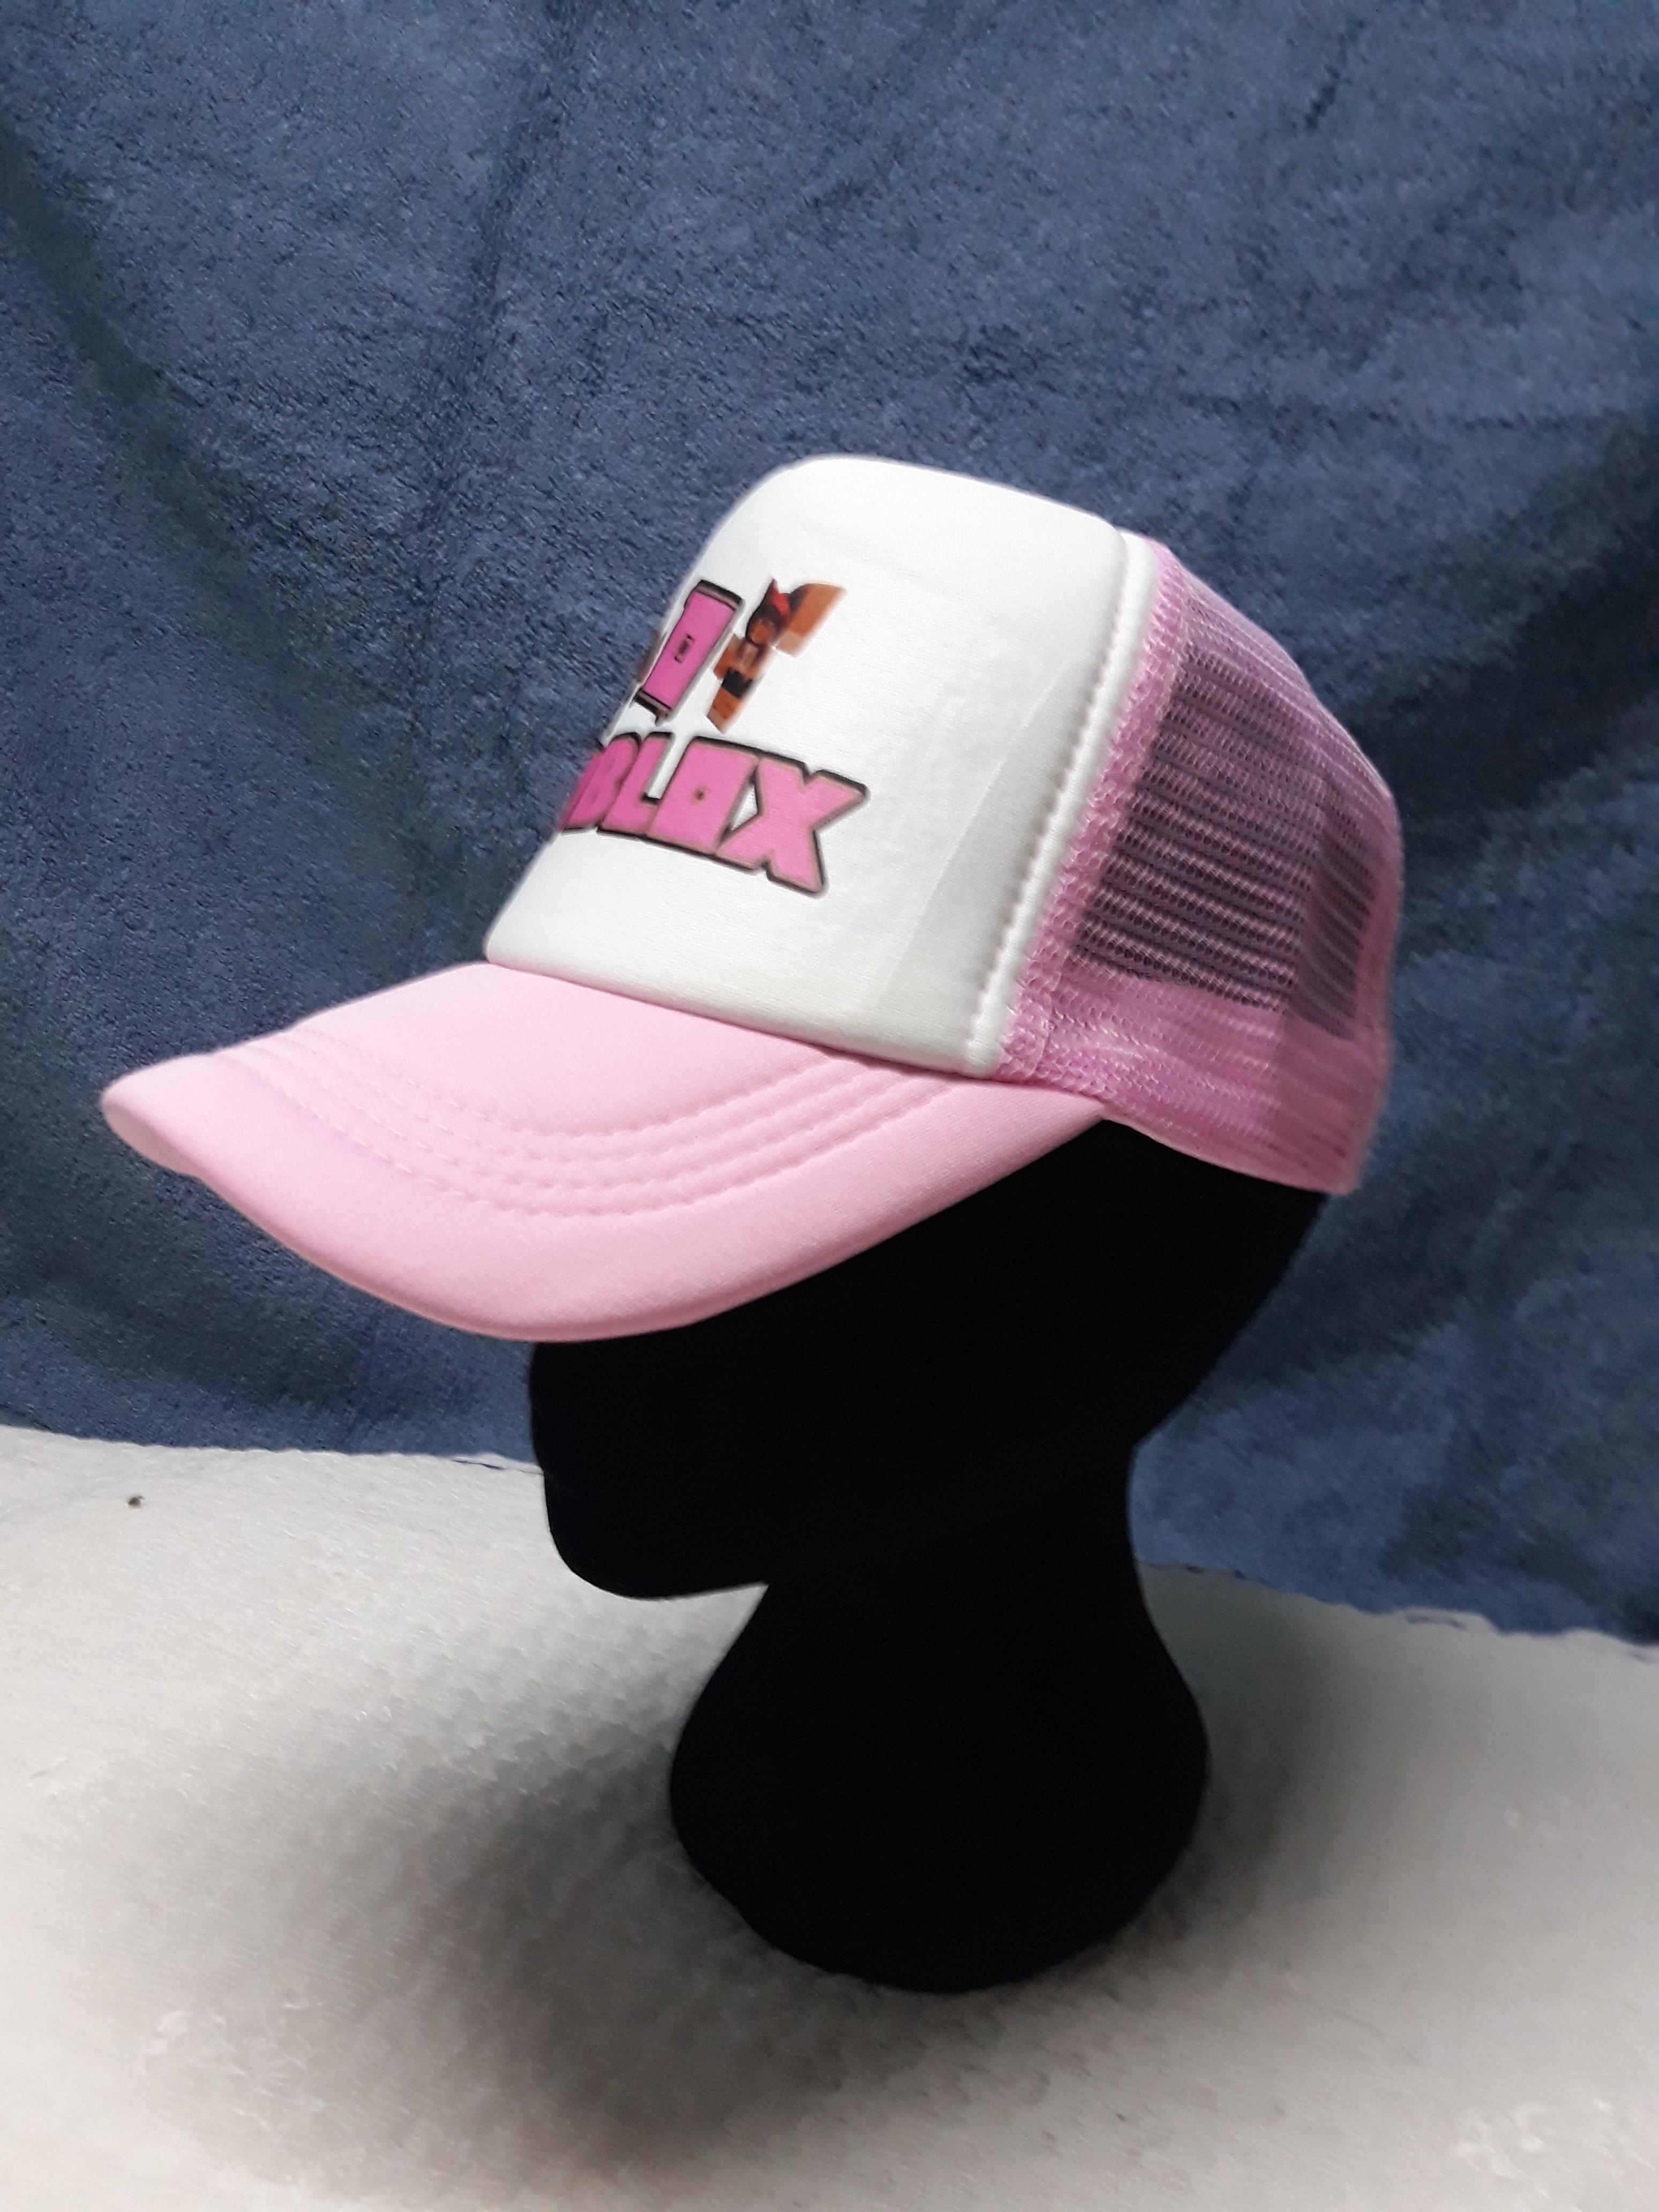 Roblox Cap Pink Buy Sell Online Hats Caps With Cheap Price Lazada Ph - adjustable game roblox kids black pink cap boys girls cap